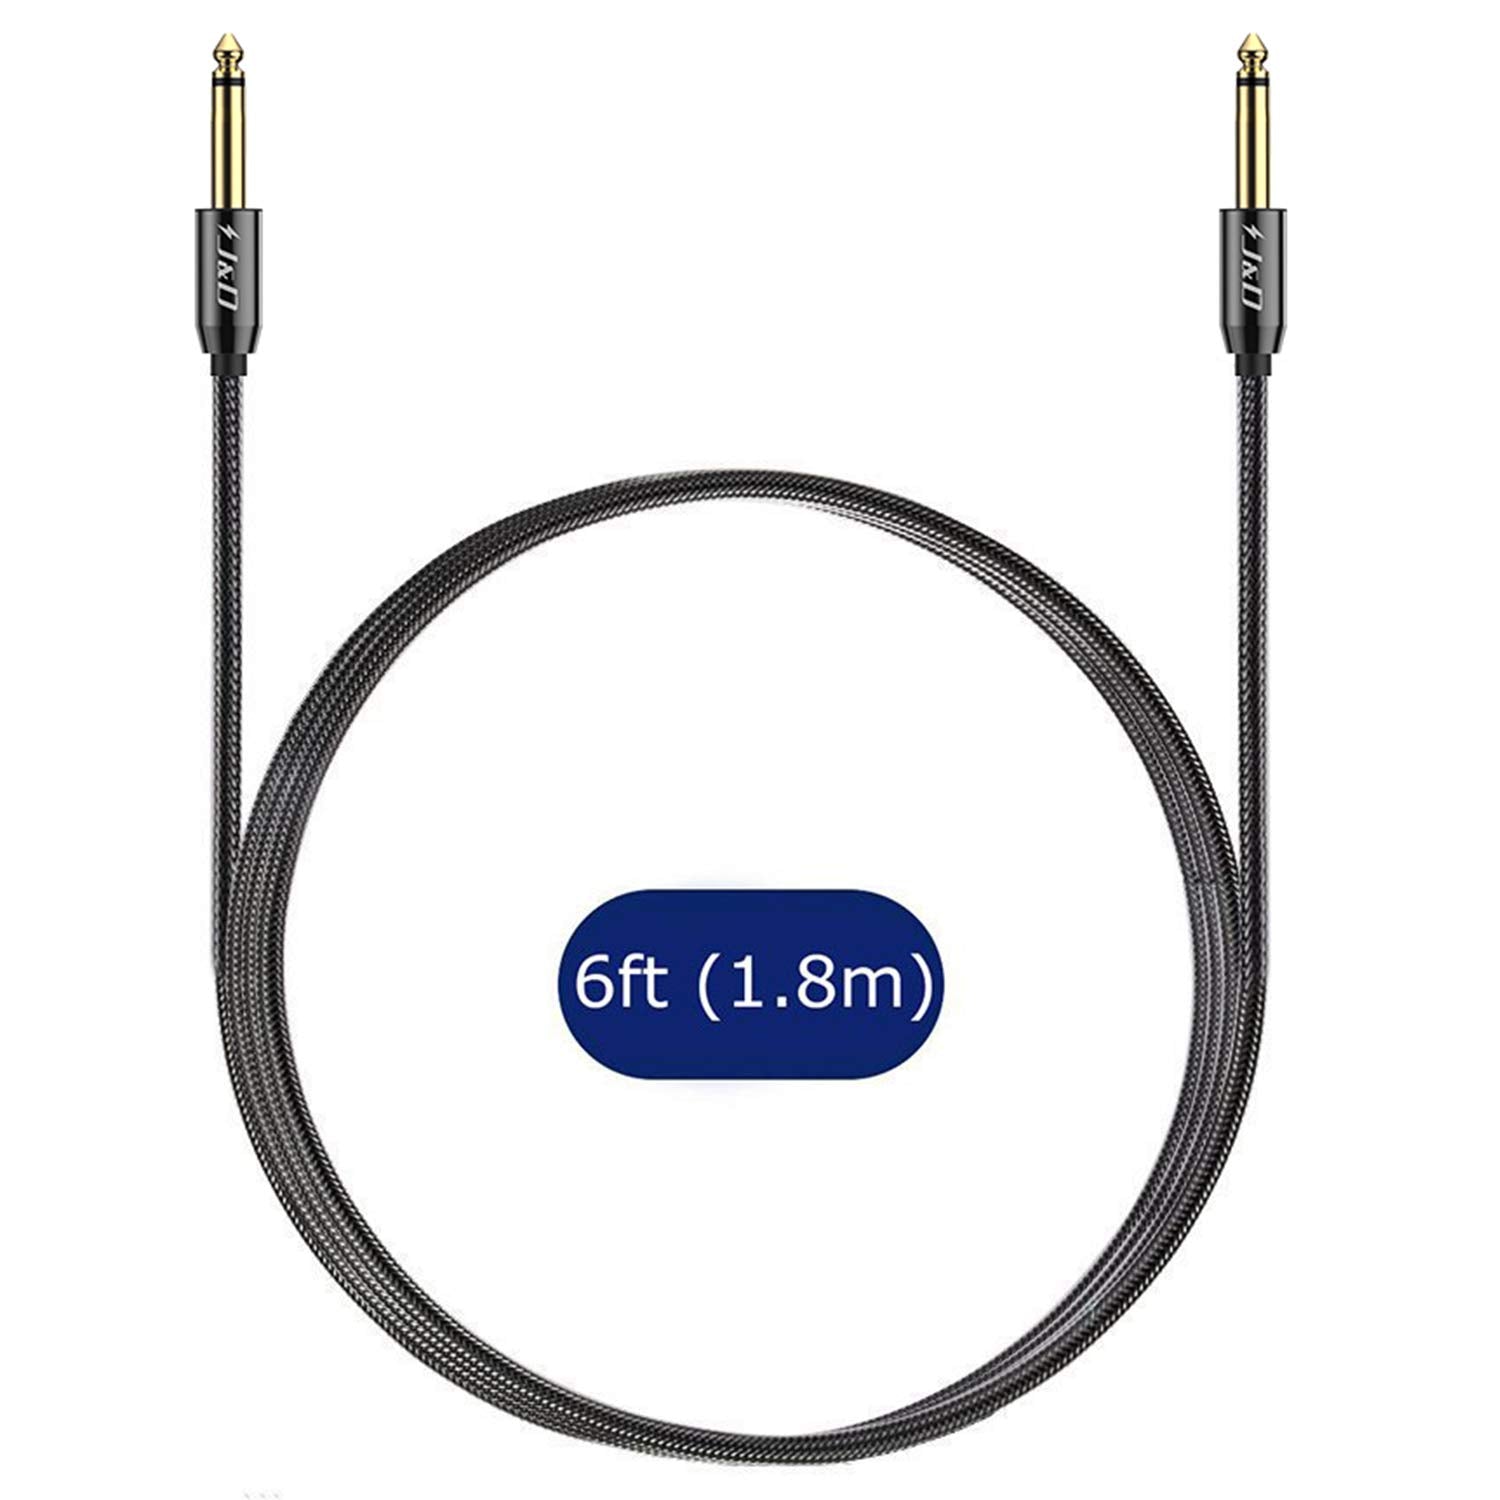 Instrument Cable from J&D Tech